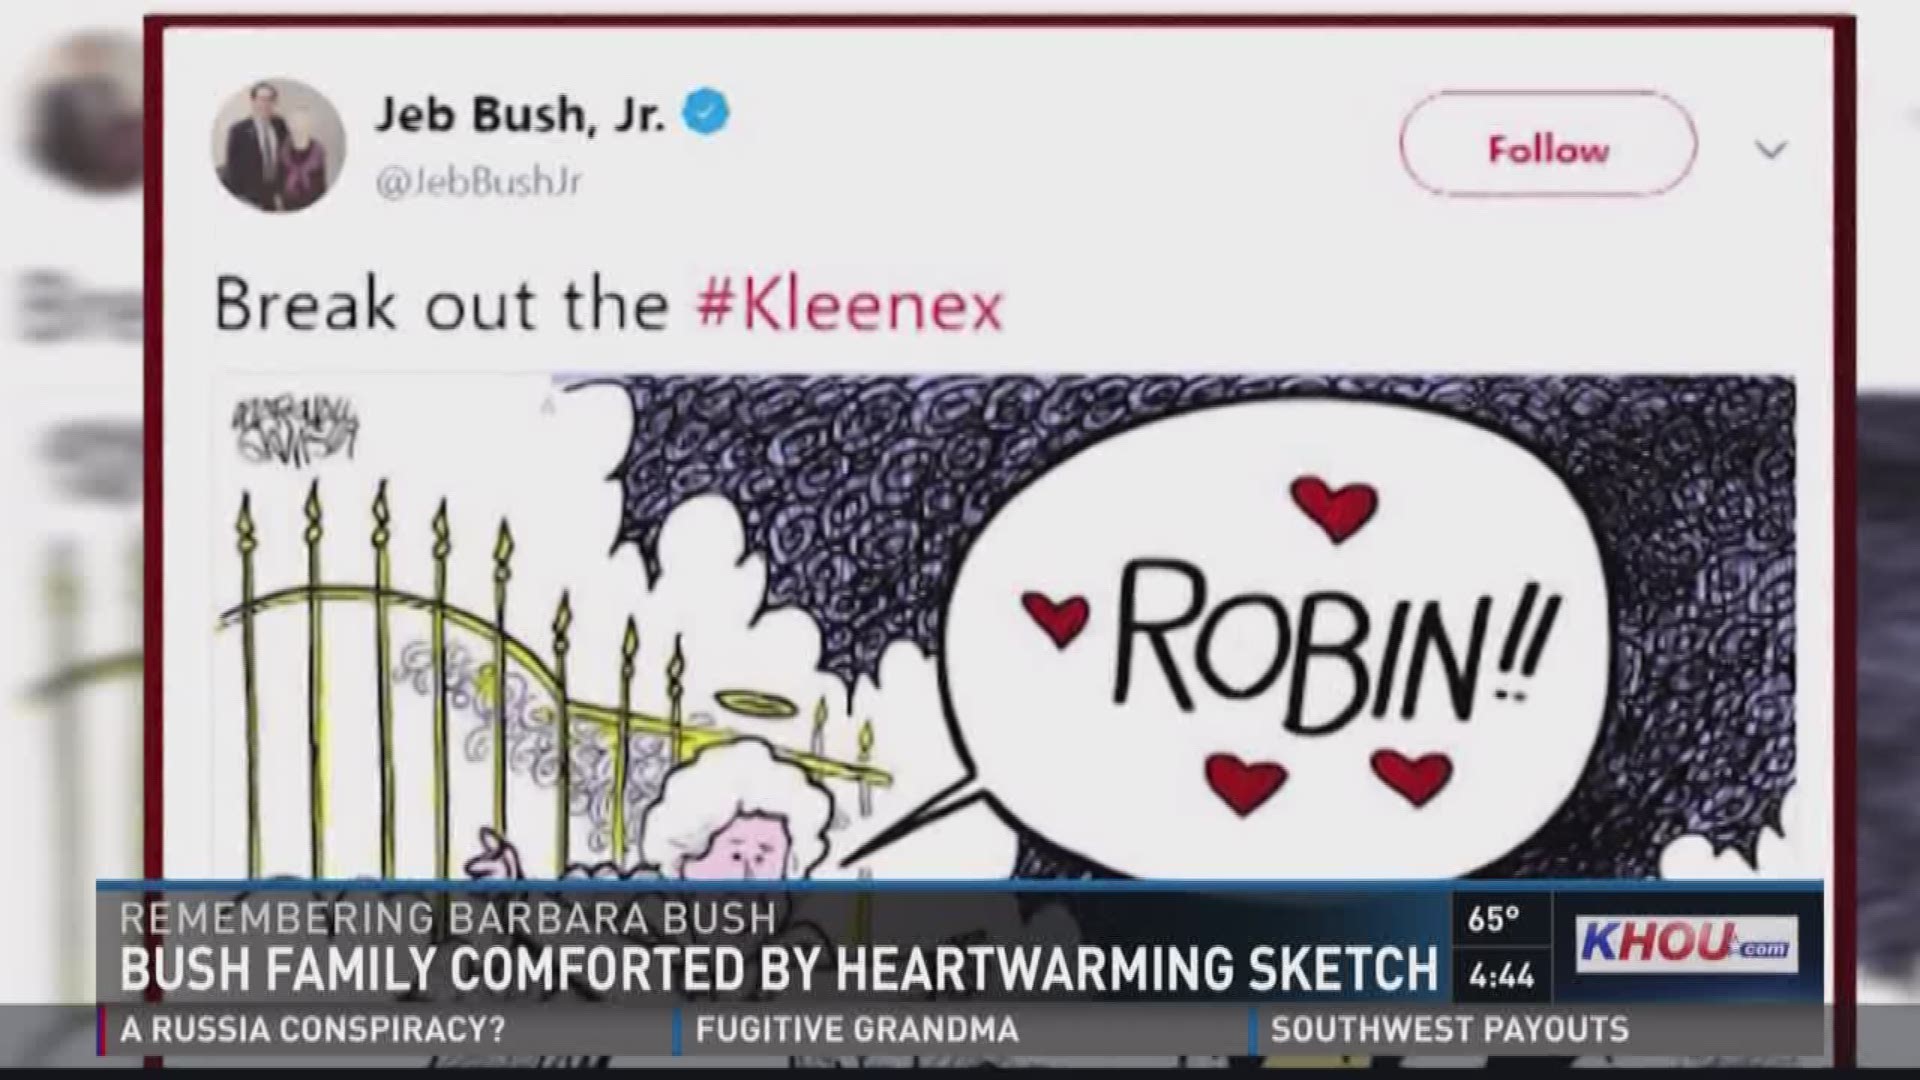 Marshall Ramsey, Editorial Cartoonist, created a cartoon that reached the First Family. It was shared on social media and the Bush Family reached out to him after seeing it. 